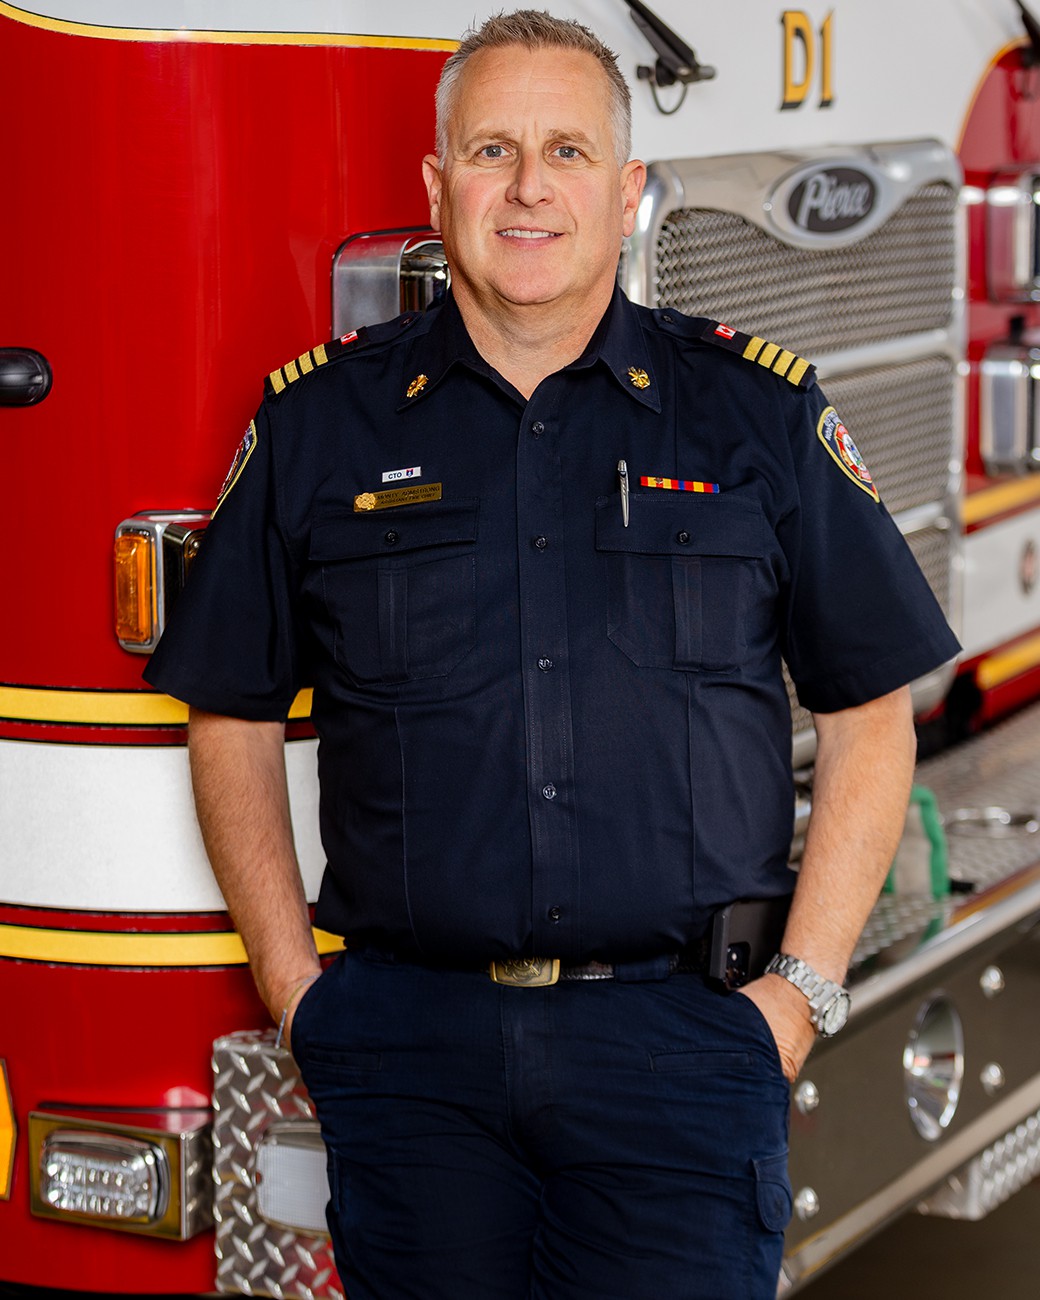 Assistant Fire Chief – Public Safety, Monty Armstrong